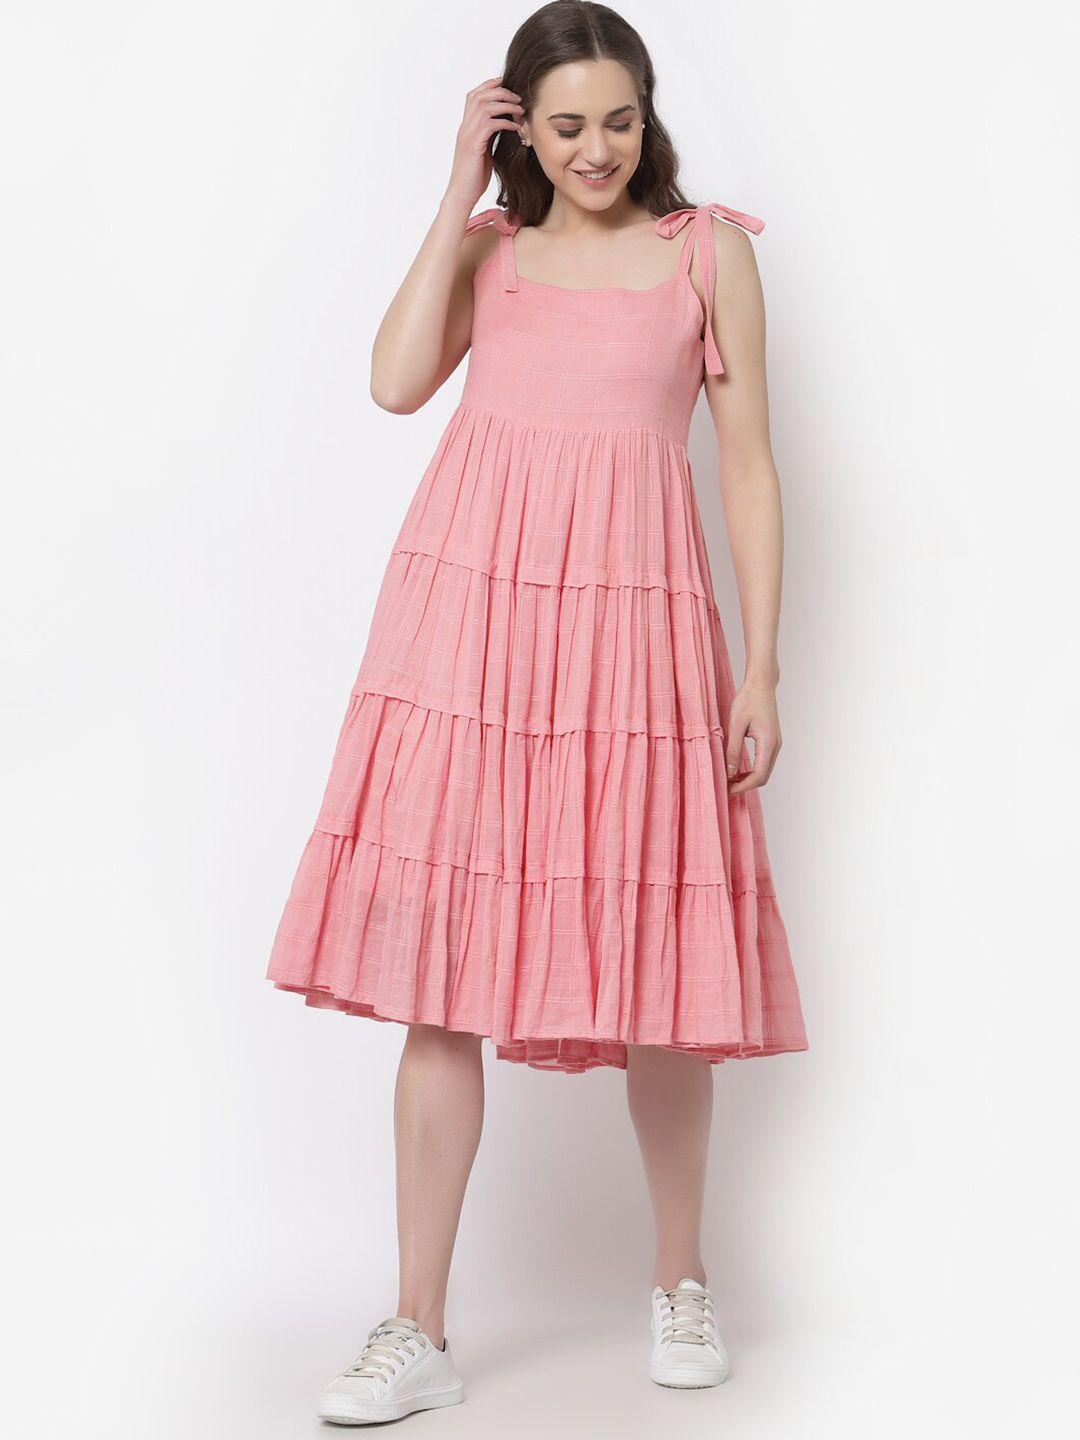 TERQUOIS Pink Layered A-Line Tie-Up Cotton Dress